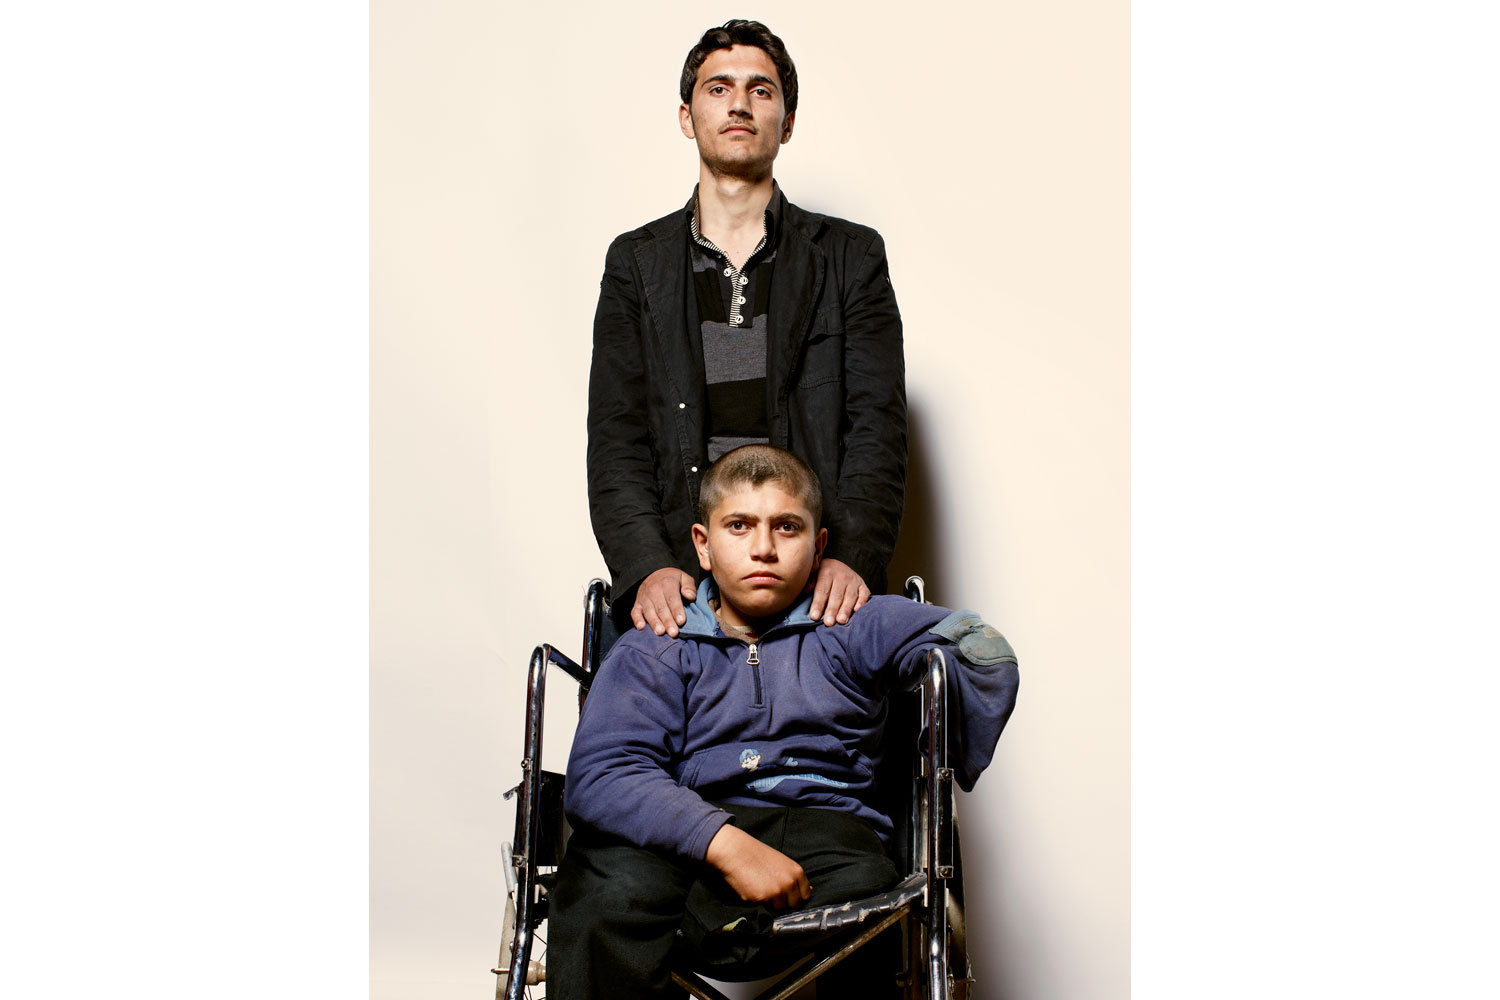 Ahmad (in wheelchair), 13, and his brother Abdullah, 20Ahmad:  I've had this chair for a while. It had to come with me. My brother carried me, and a good man carried my chair. Abdullah:  I could see that death was behind us, and in front of us, there was a faint hope of life. He drives me mad sometimes, and he's a handful, but he's my brother. I would not leave him. I carried him on my back for about four hours, from hill to hill.